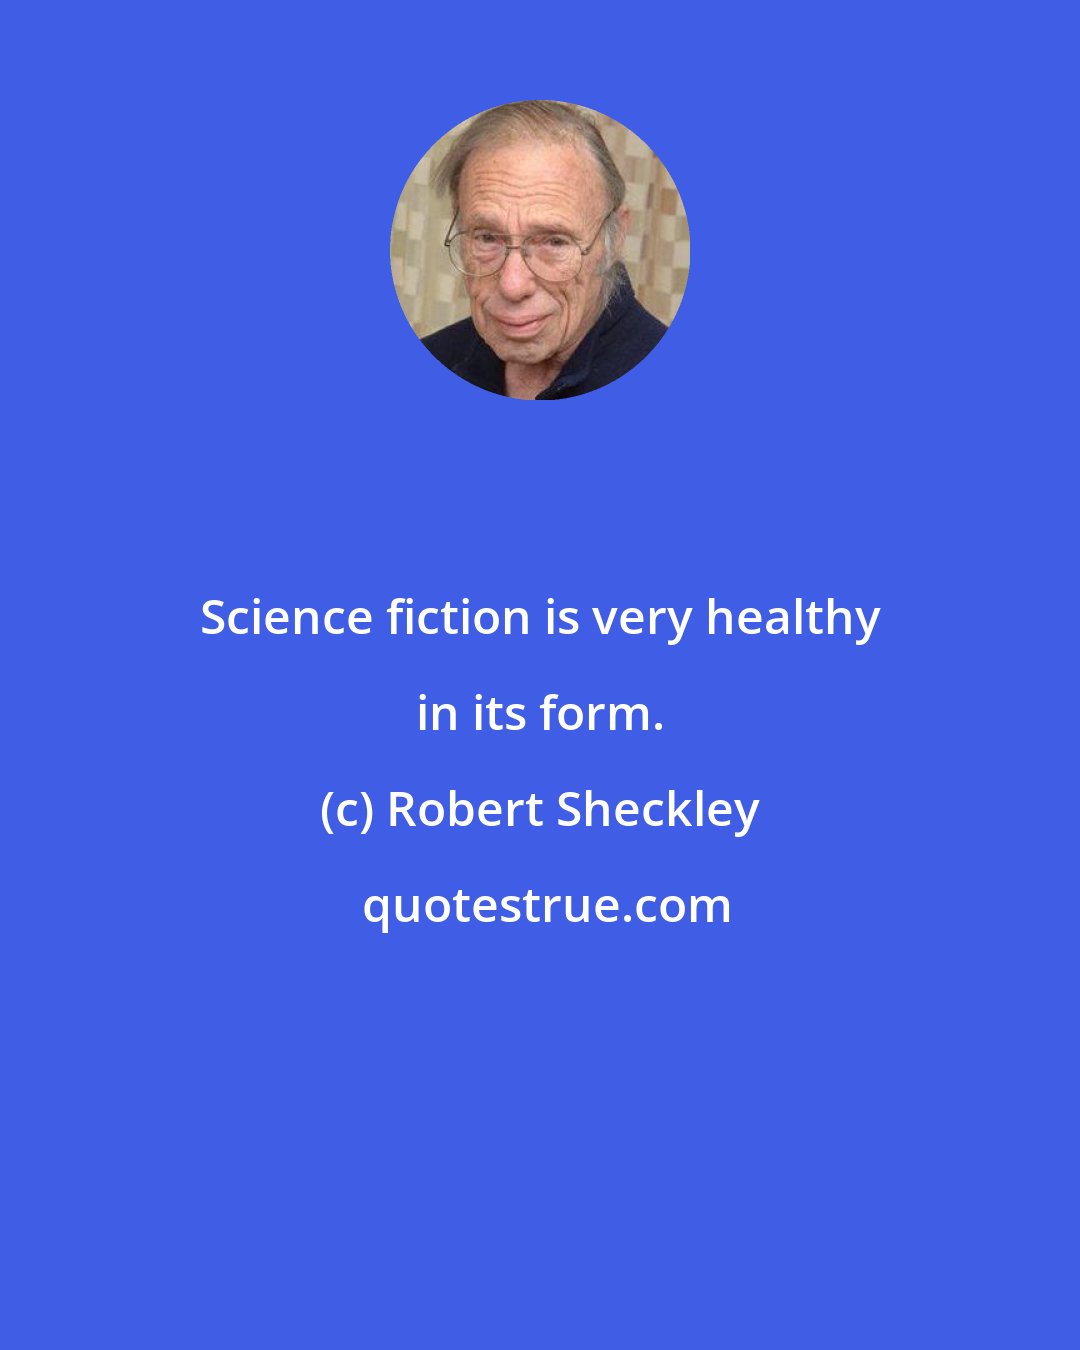 Robert Sheckley: Science fiction is very healthy in its form.